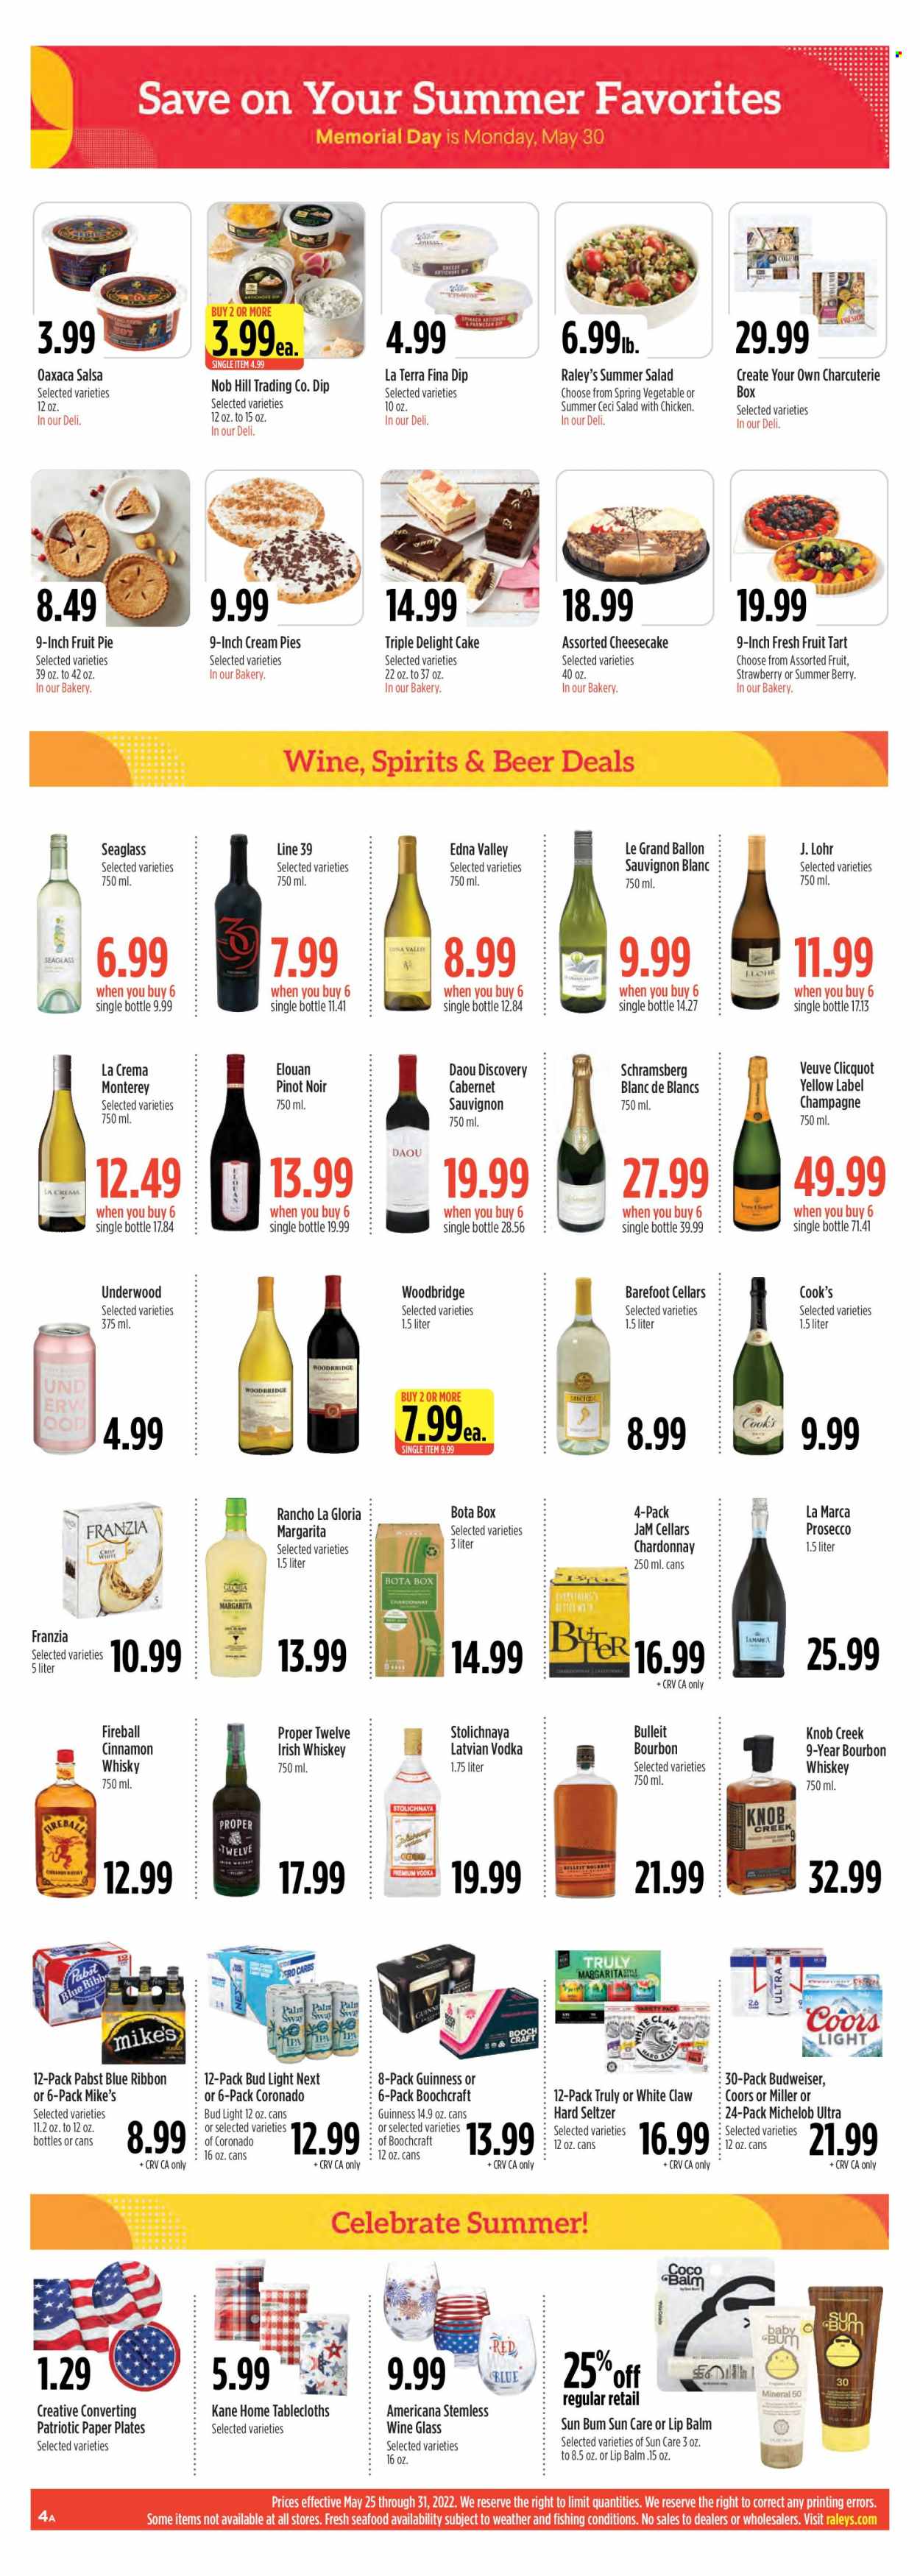 thumbnail - Raley's Flyer - 05/25/2022 - 05/31/2022 - Sales products - cake, pie, cheesecake, cream pie, fruit tart, artichoke, salad, seafood, Cook's, parmesan, dip, salsa, Cabernet Sauvignon, red wine, white wine, champagne, prosecco, Chardonnay, Pinot Noir, Veuve Clicquot, Sauvignon Blanc, Woodbridge, bourbon, vodka, whiskey, irish whiskey, White Claw, Hard Seltzer, TRULY, cinnamon whisky, bourbon whiskey, whisky, beer, Bud Light, Guinness, Miller, IPA, Pabst Blue Ribbon, lip balm, Budweiser, Coors, Michelob. Page 5.